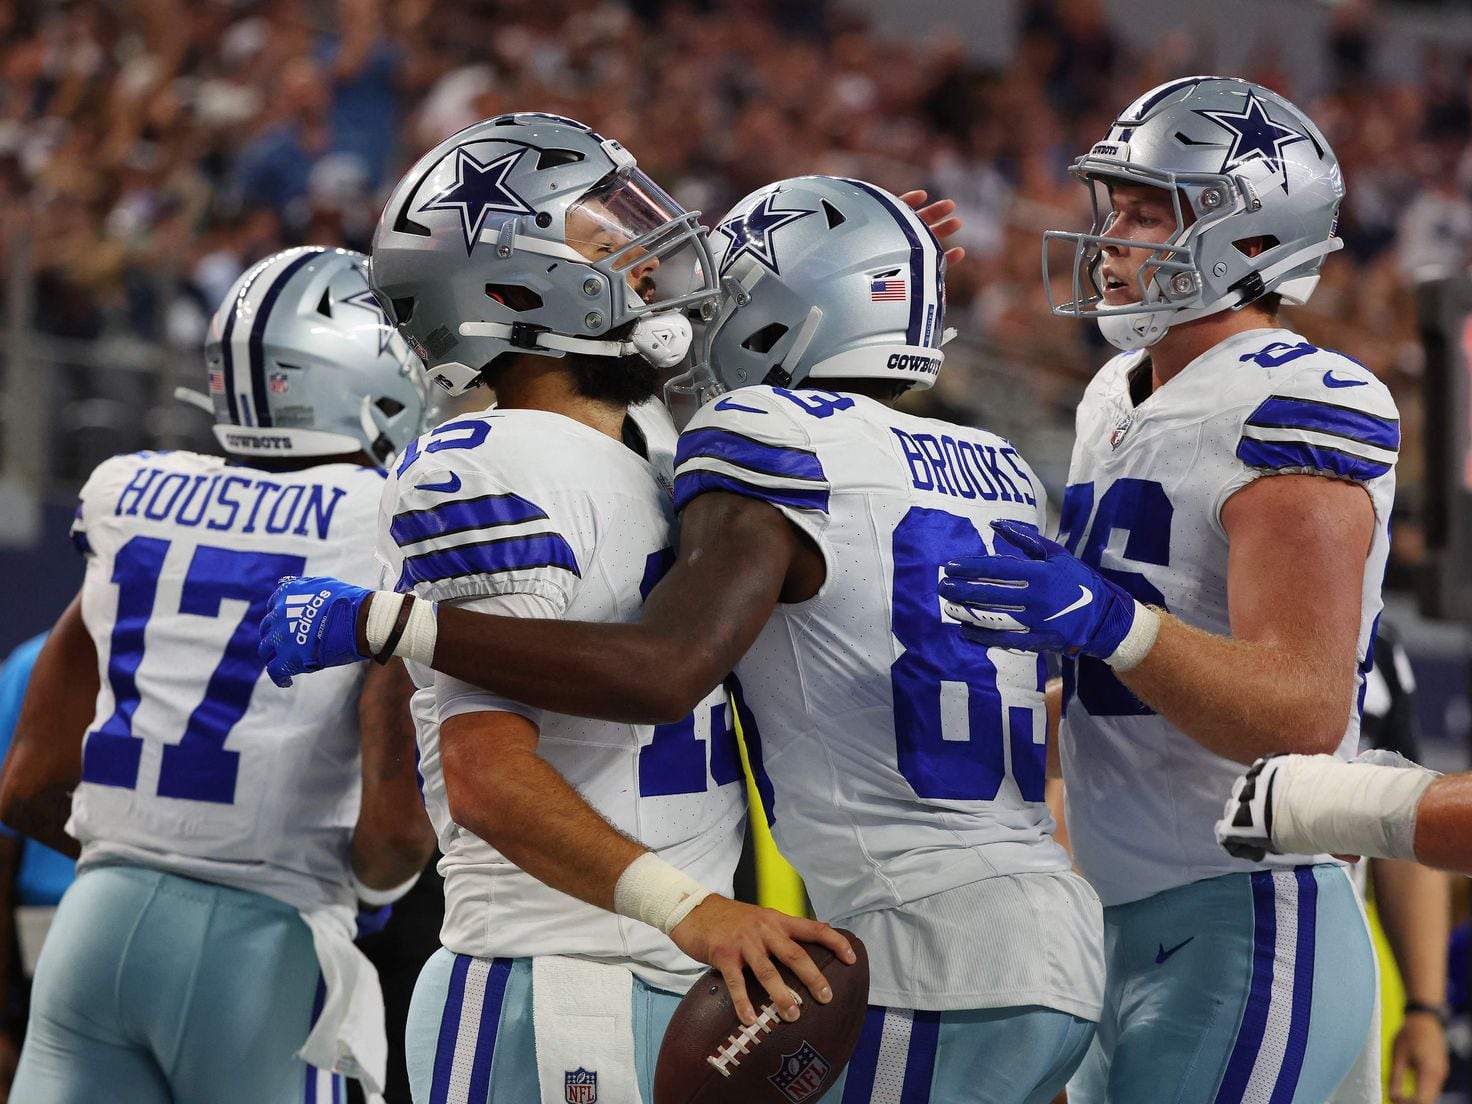 Issues in the red zone are a broken record for Cowboys